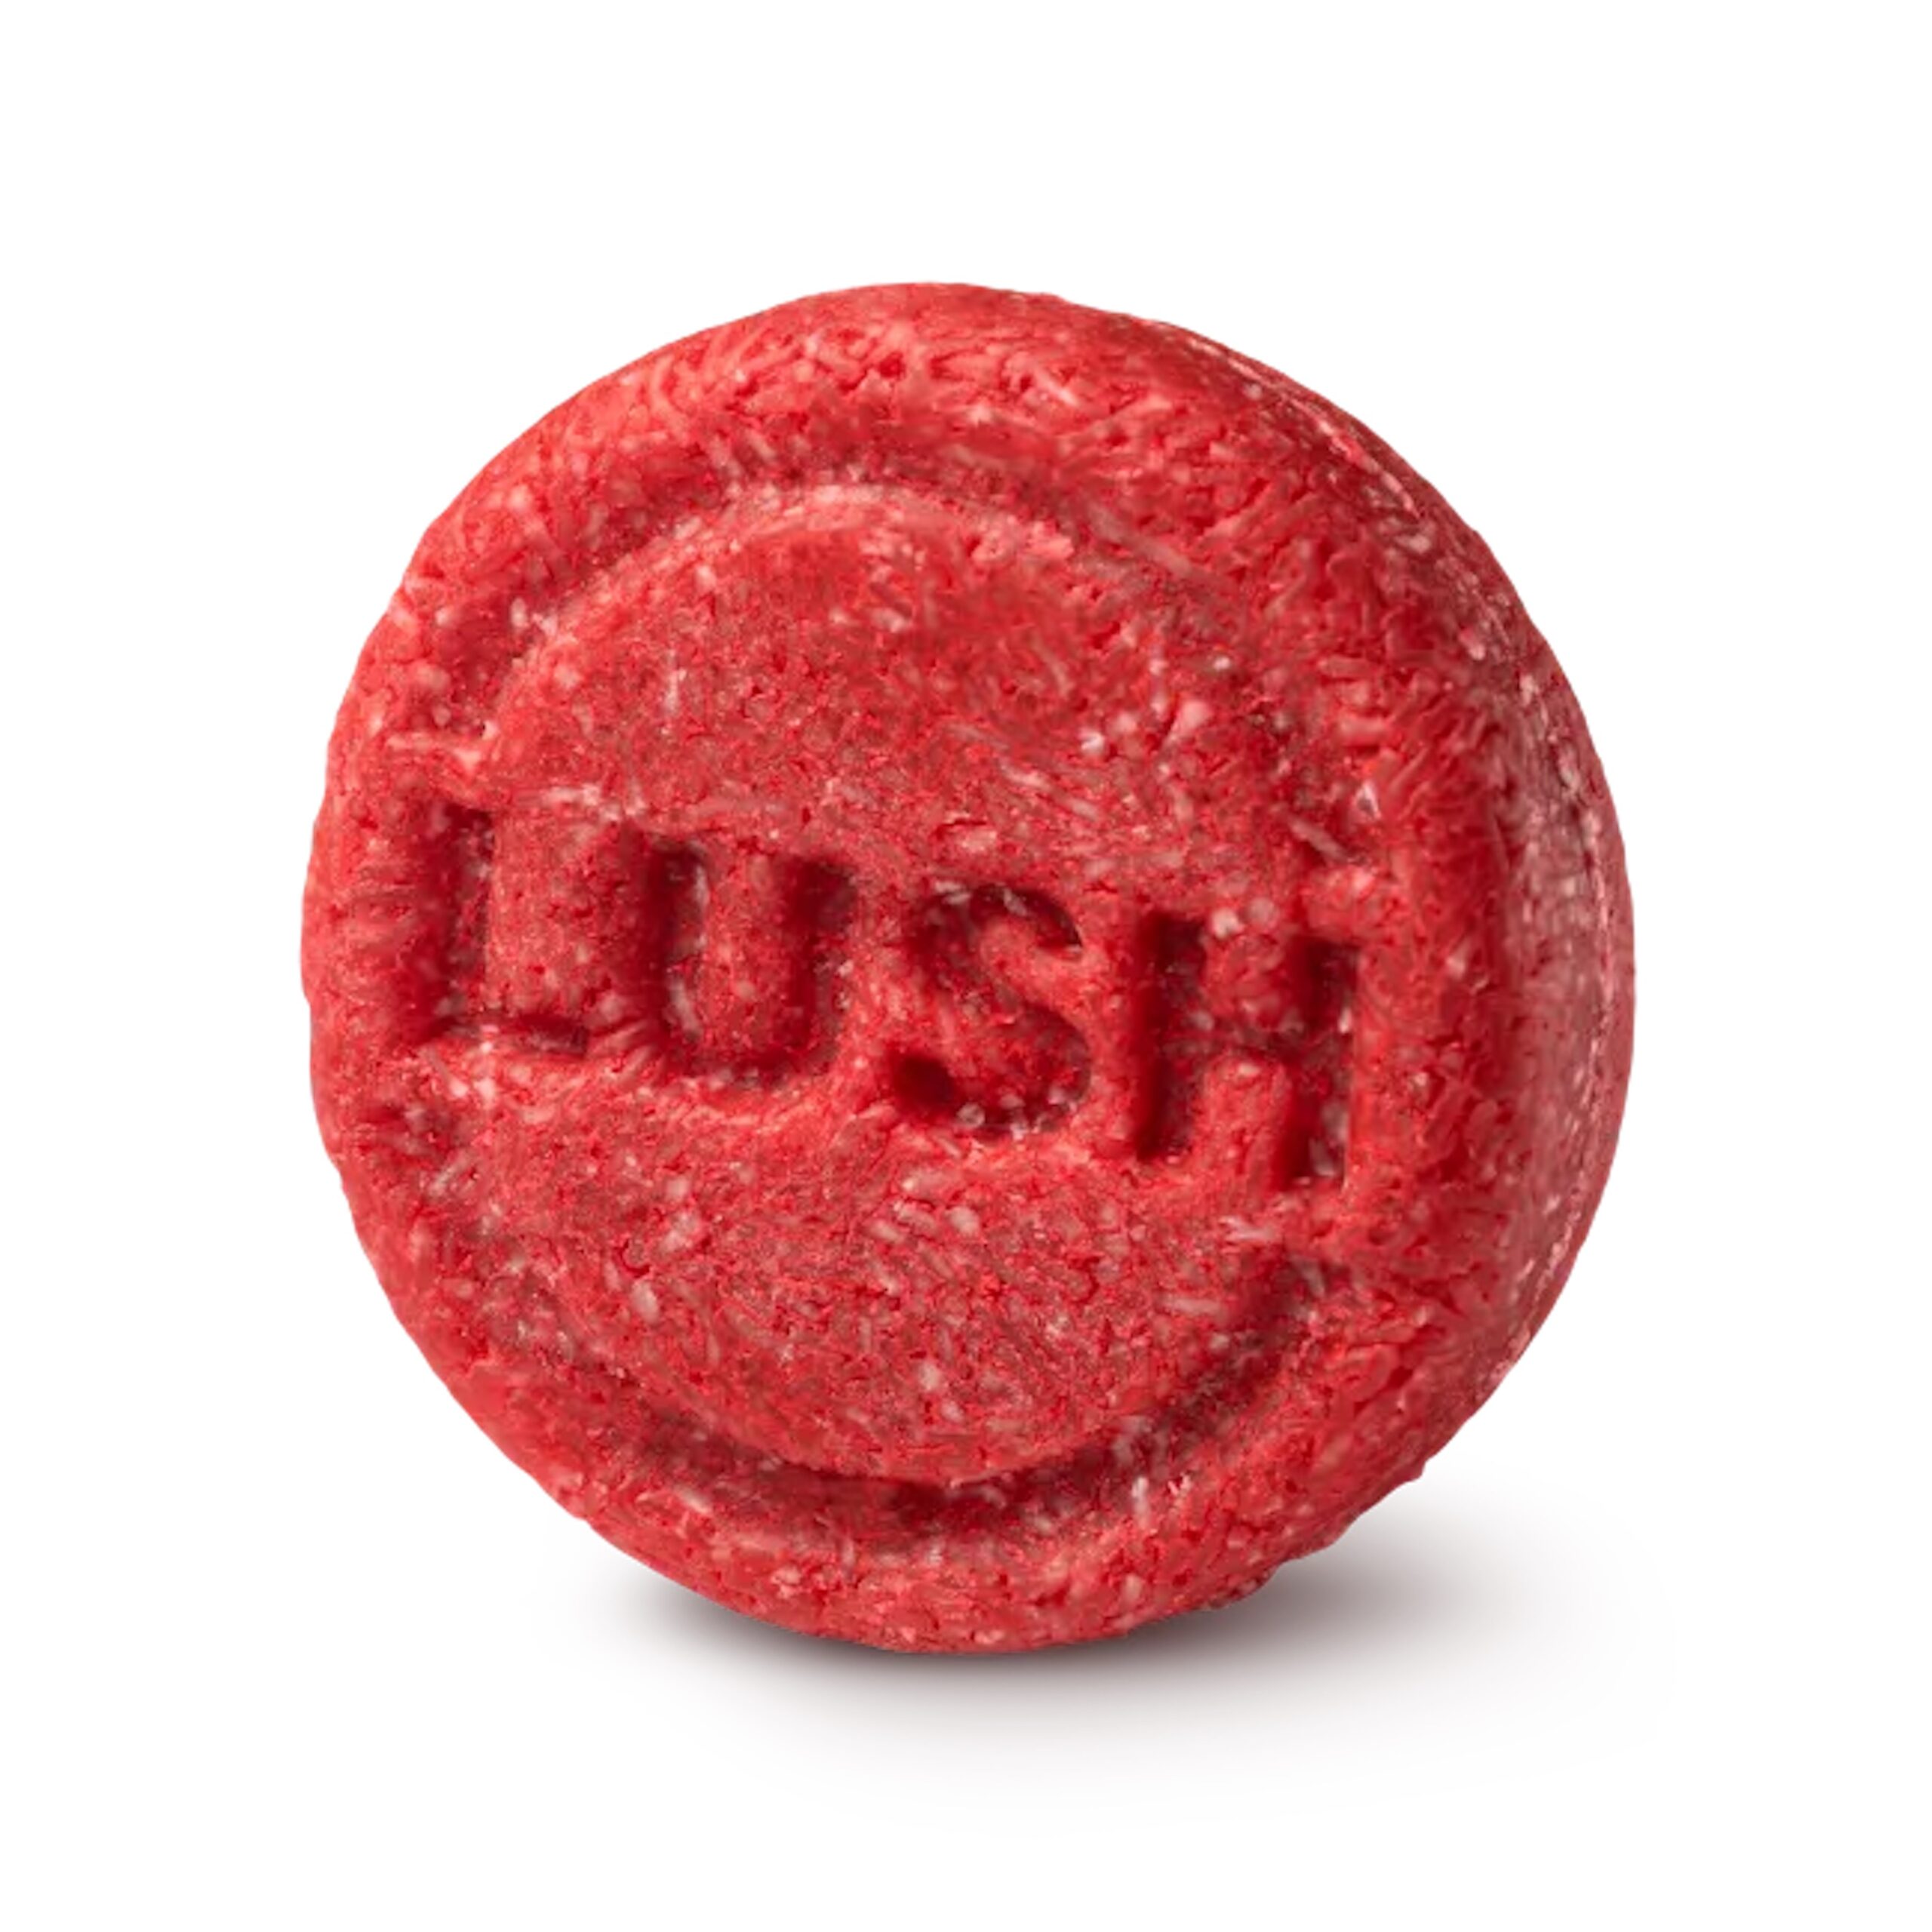 Lush Gets Nakedly Candid About Sustainability  Dieline - Design, Branding  & Packaging Inspiration